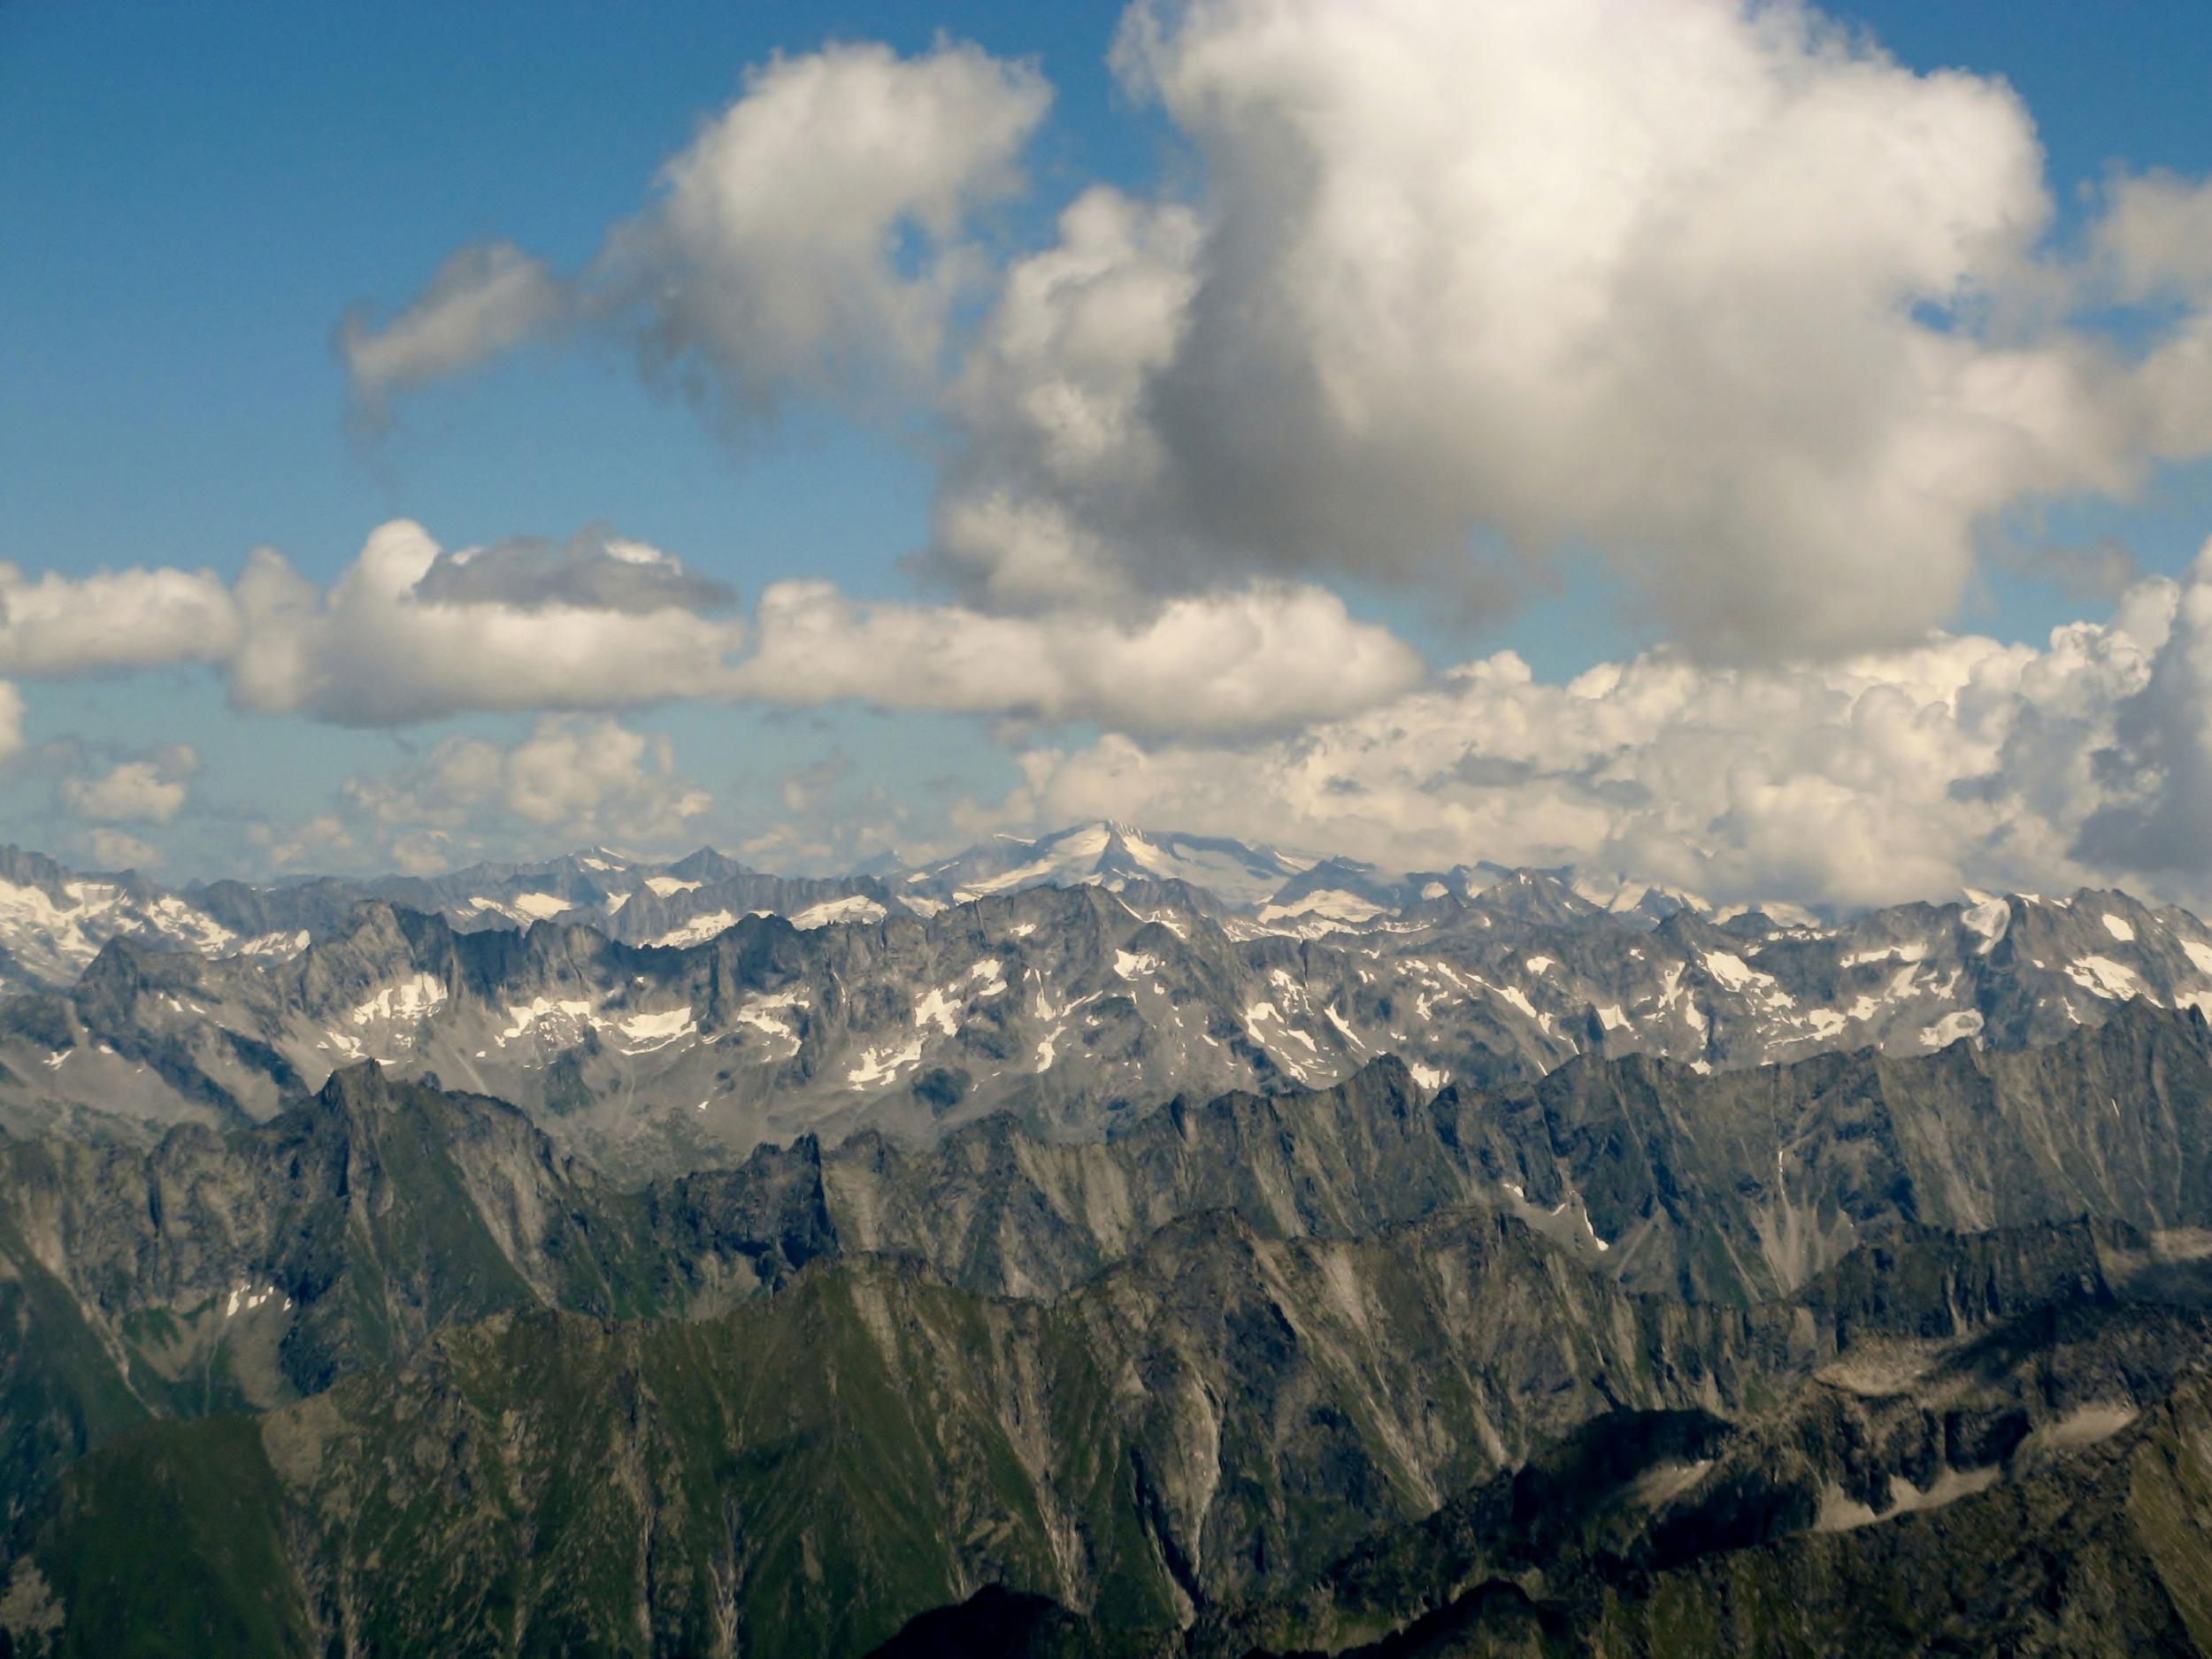 The Zillertal Alps are a popular area for hiking and climbing